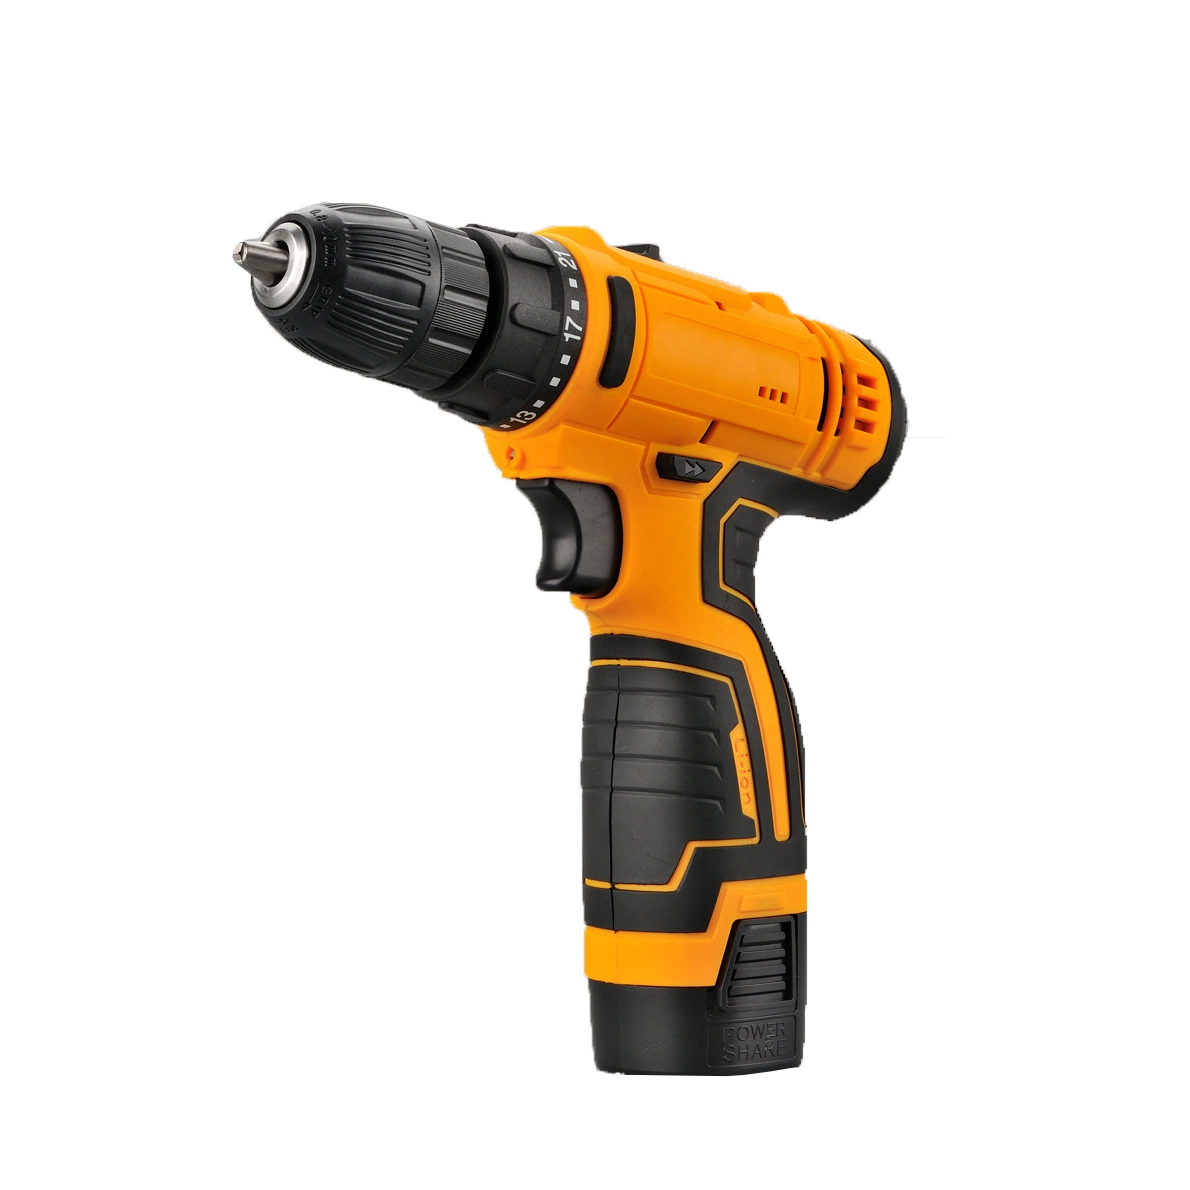 21V Power Tools Electric Cordless Drill/Screwdriver with Bits